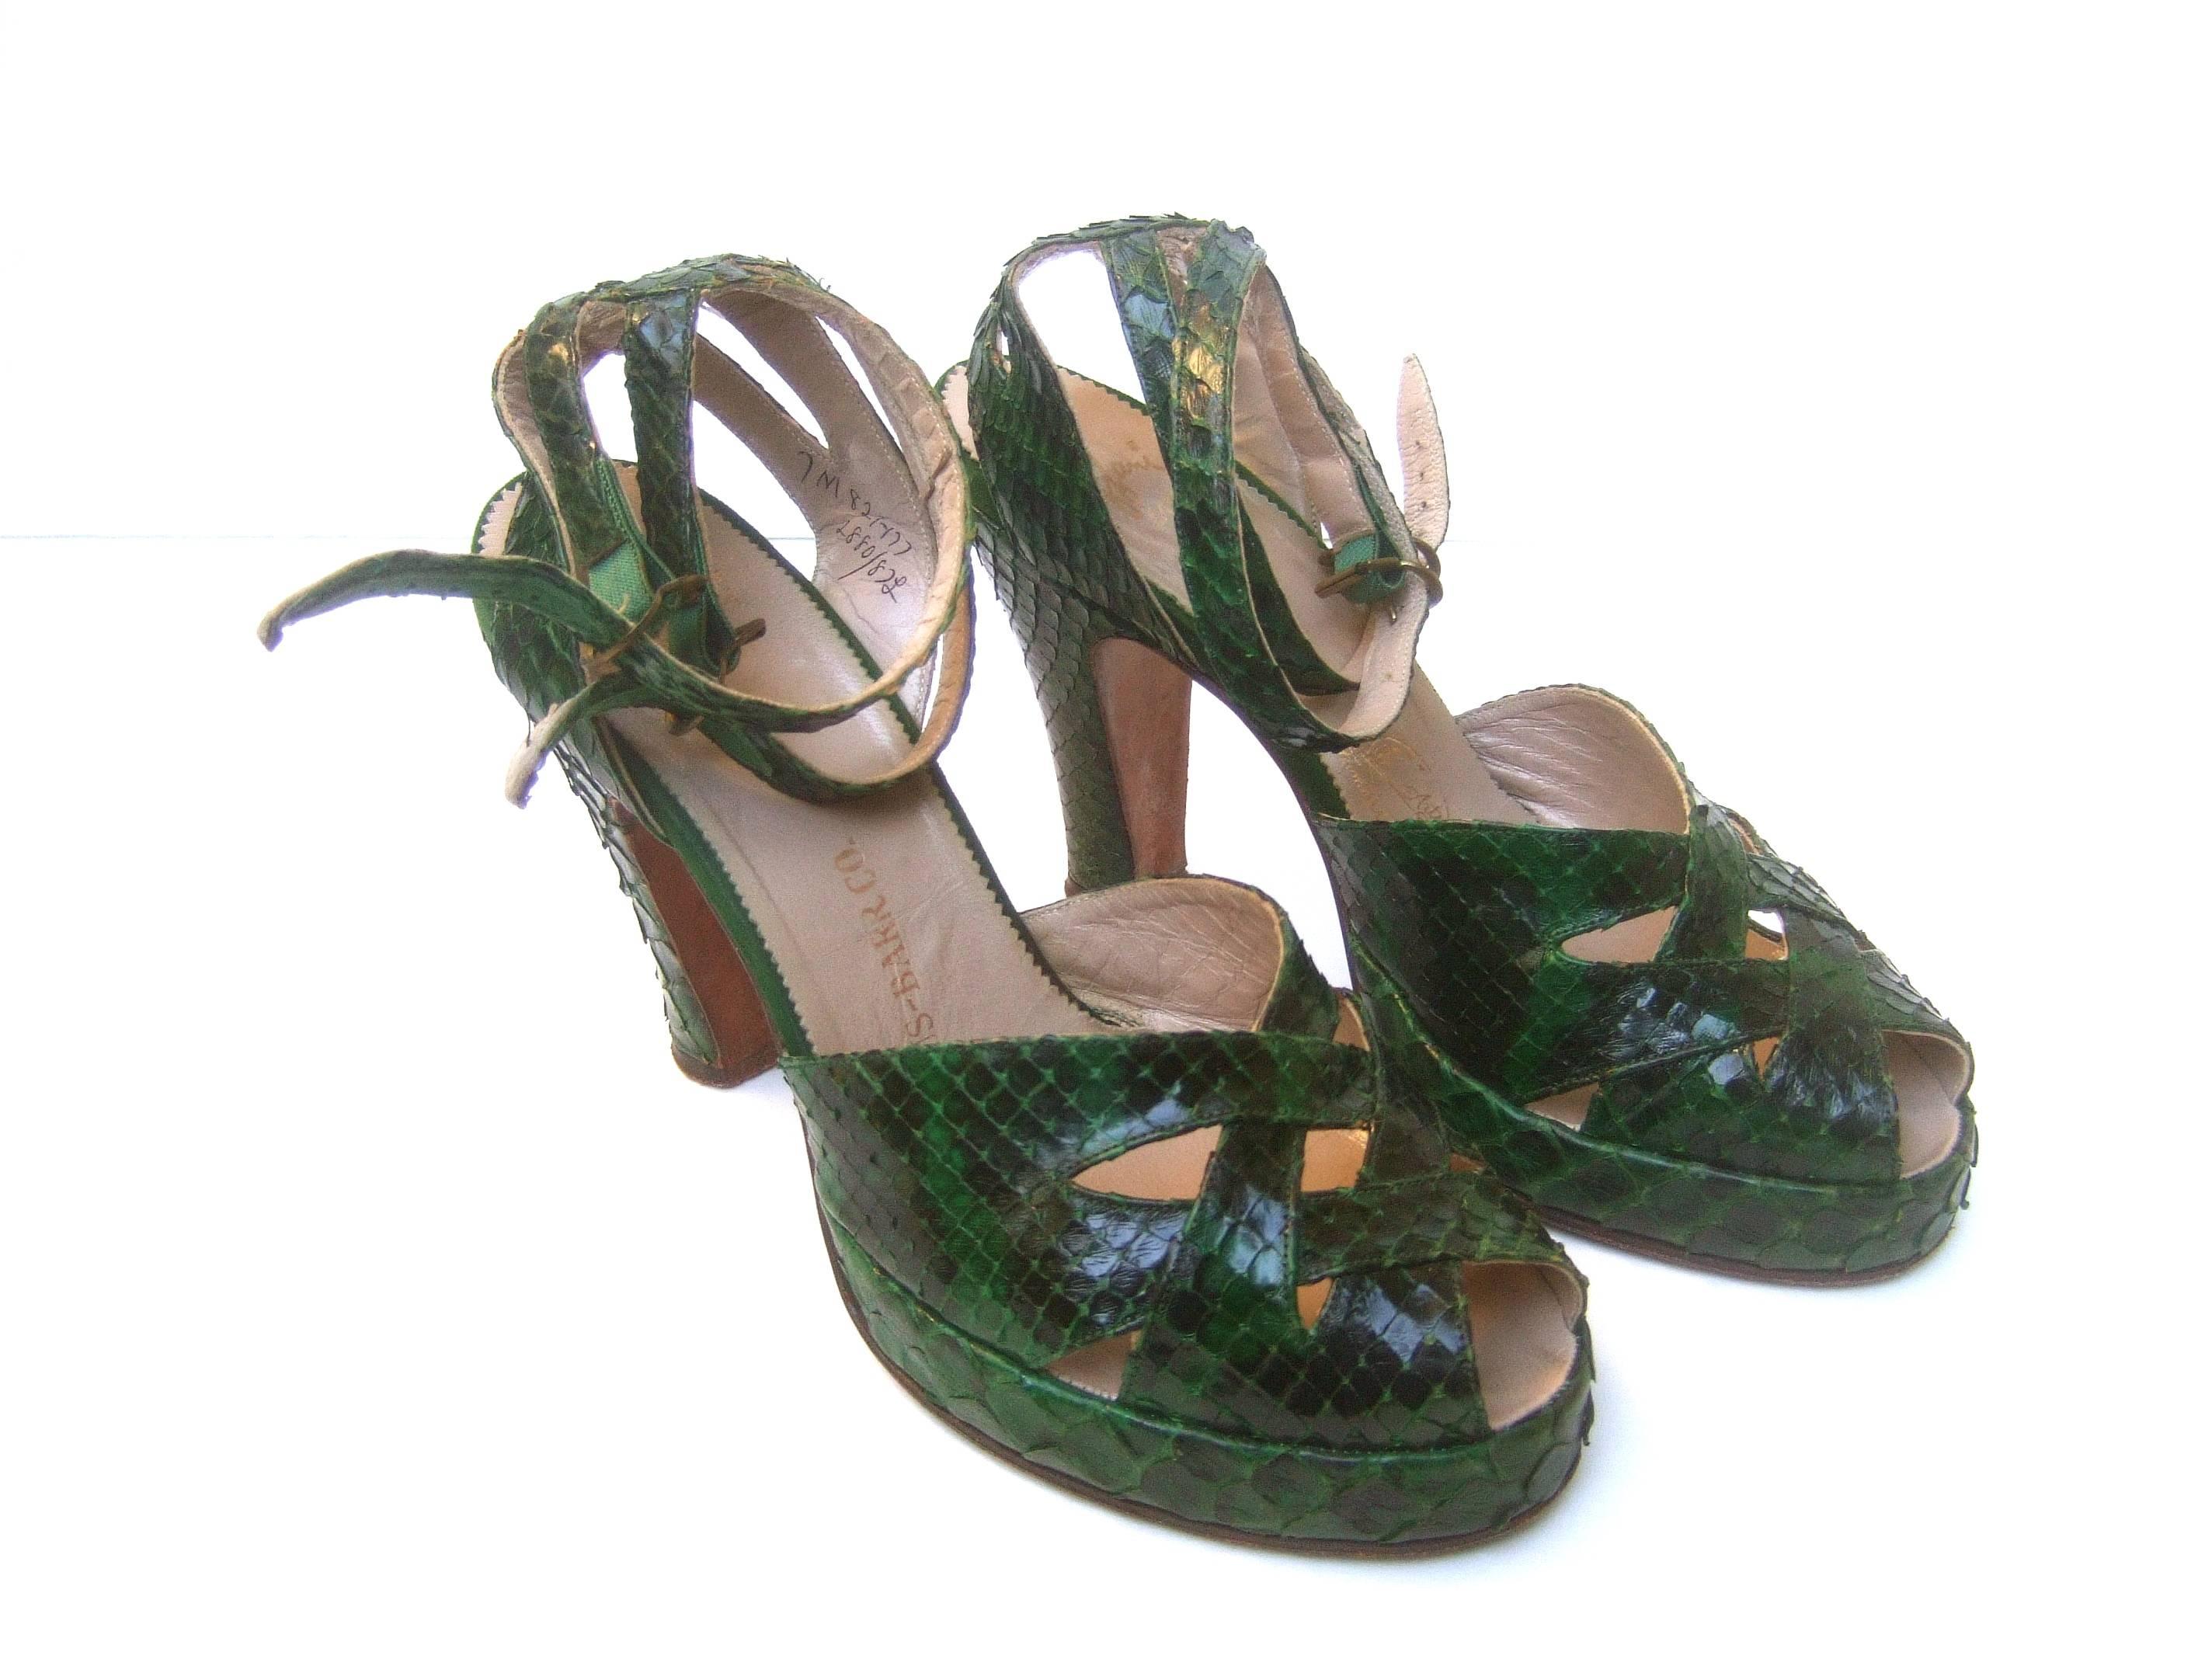 1940s Exotic snakeskin peep toe ankle strap platform shoes 
The stylish retro ankle strap platforms are designed
with dark green snakeskin 

The ankle straps have two bands of snakeskin 
that wrap around the leg. The front of the shoes
have a